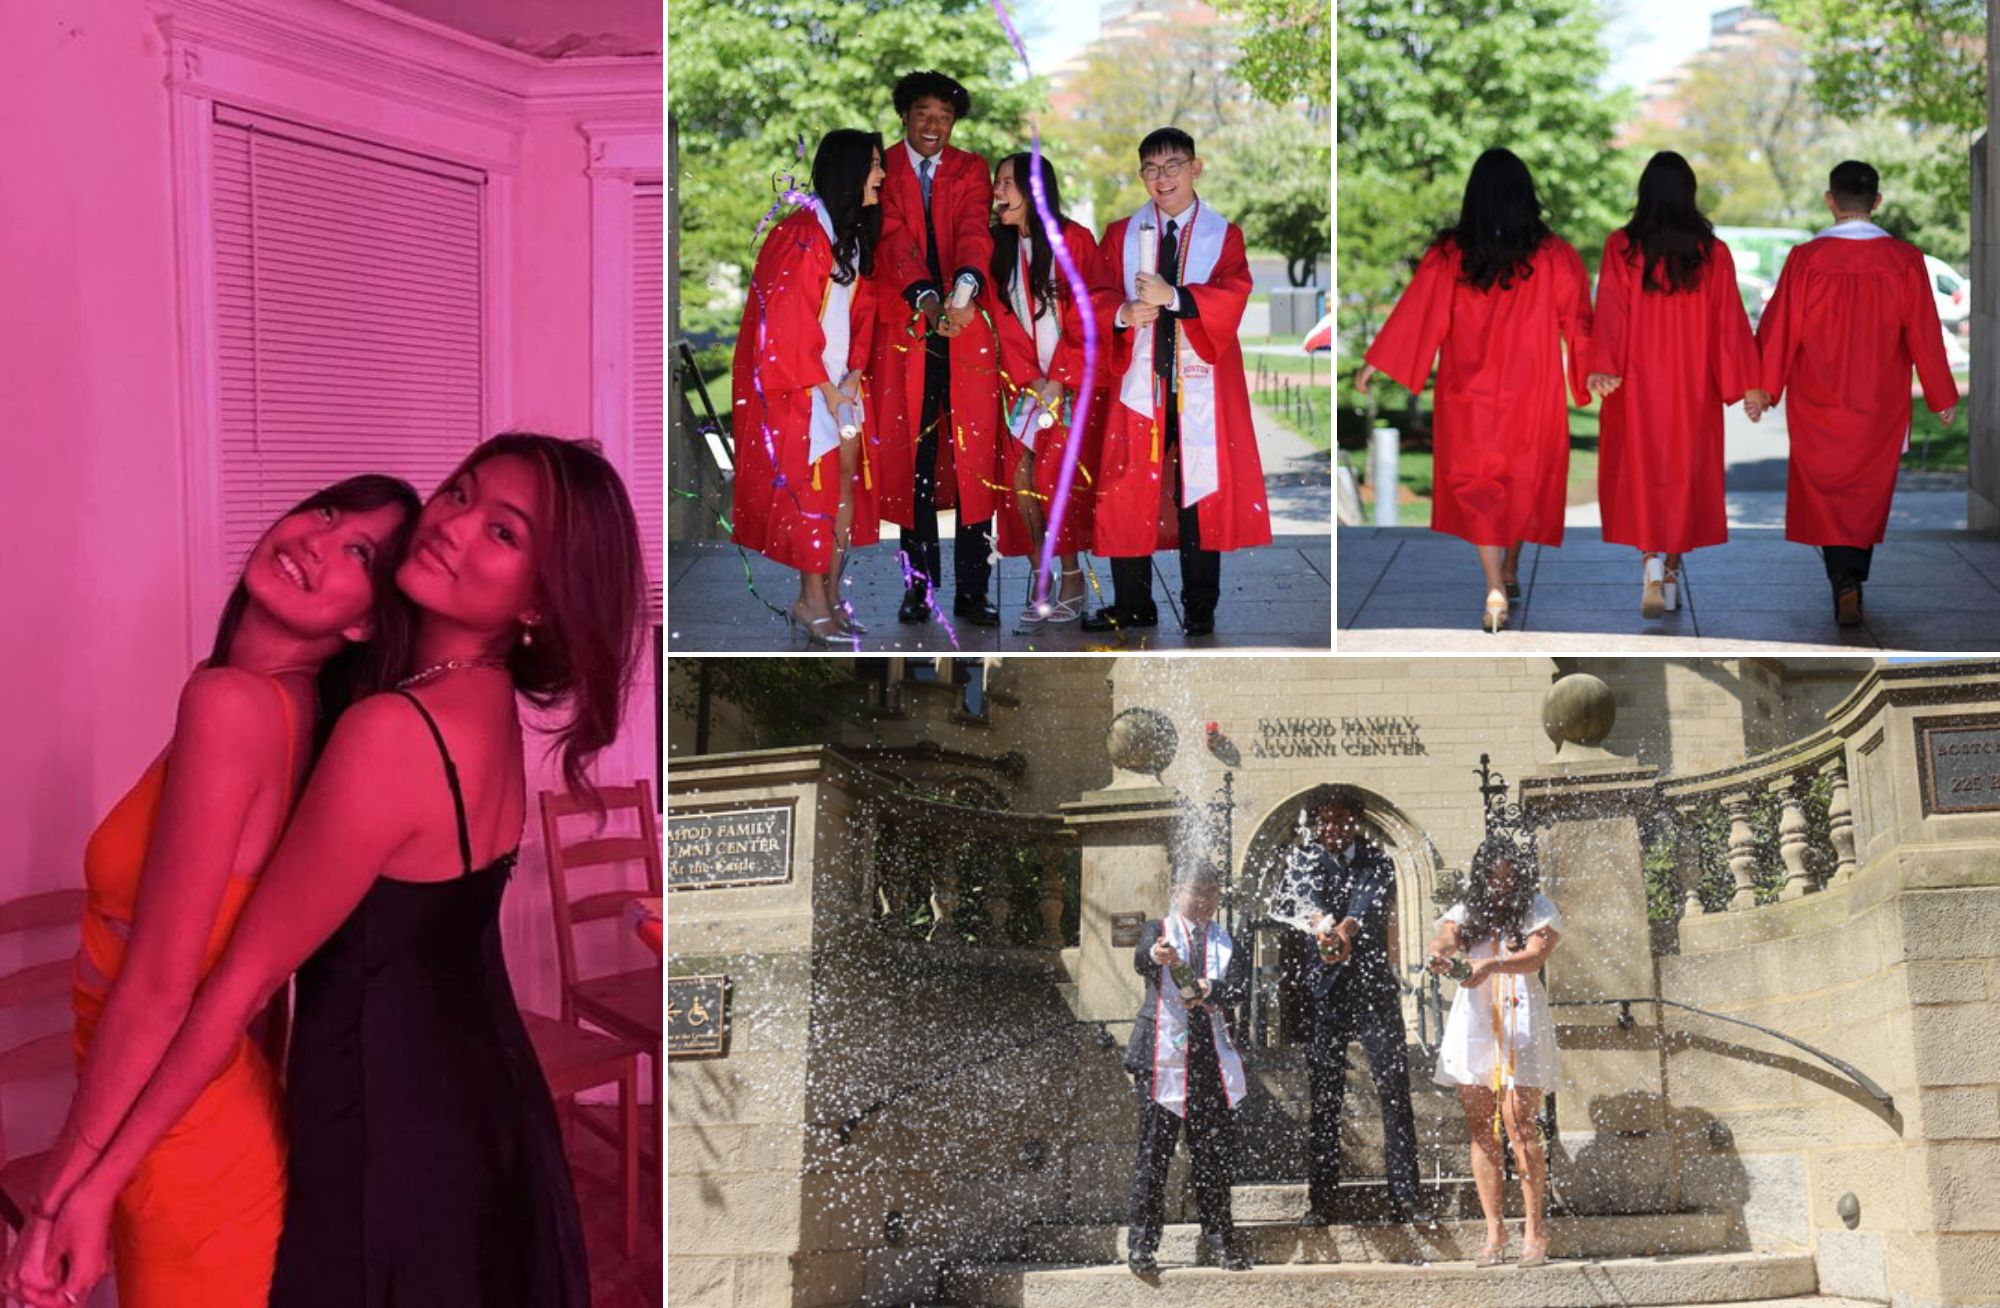 Photo: A collage of four images showcasing moments of celebration and bonding. The top left shows two individuals posing happily in front of a pink wall, one in an orange dress and the other in black attire. The top right captures graduates in red gowns and caps, proudly holding diplomas while walking. The bottom left is indistinct, featuring a stone structure and plaque. The bottom right depicts three individuals joyously celebrating with one popping a champagne bottle near a stone structure with inscriptions.